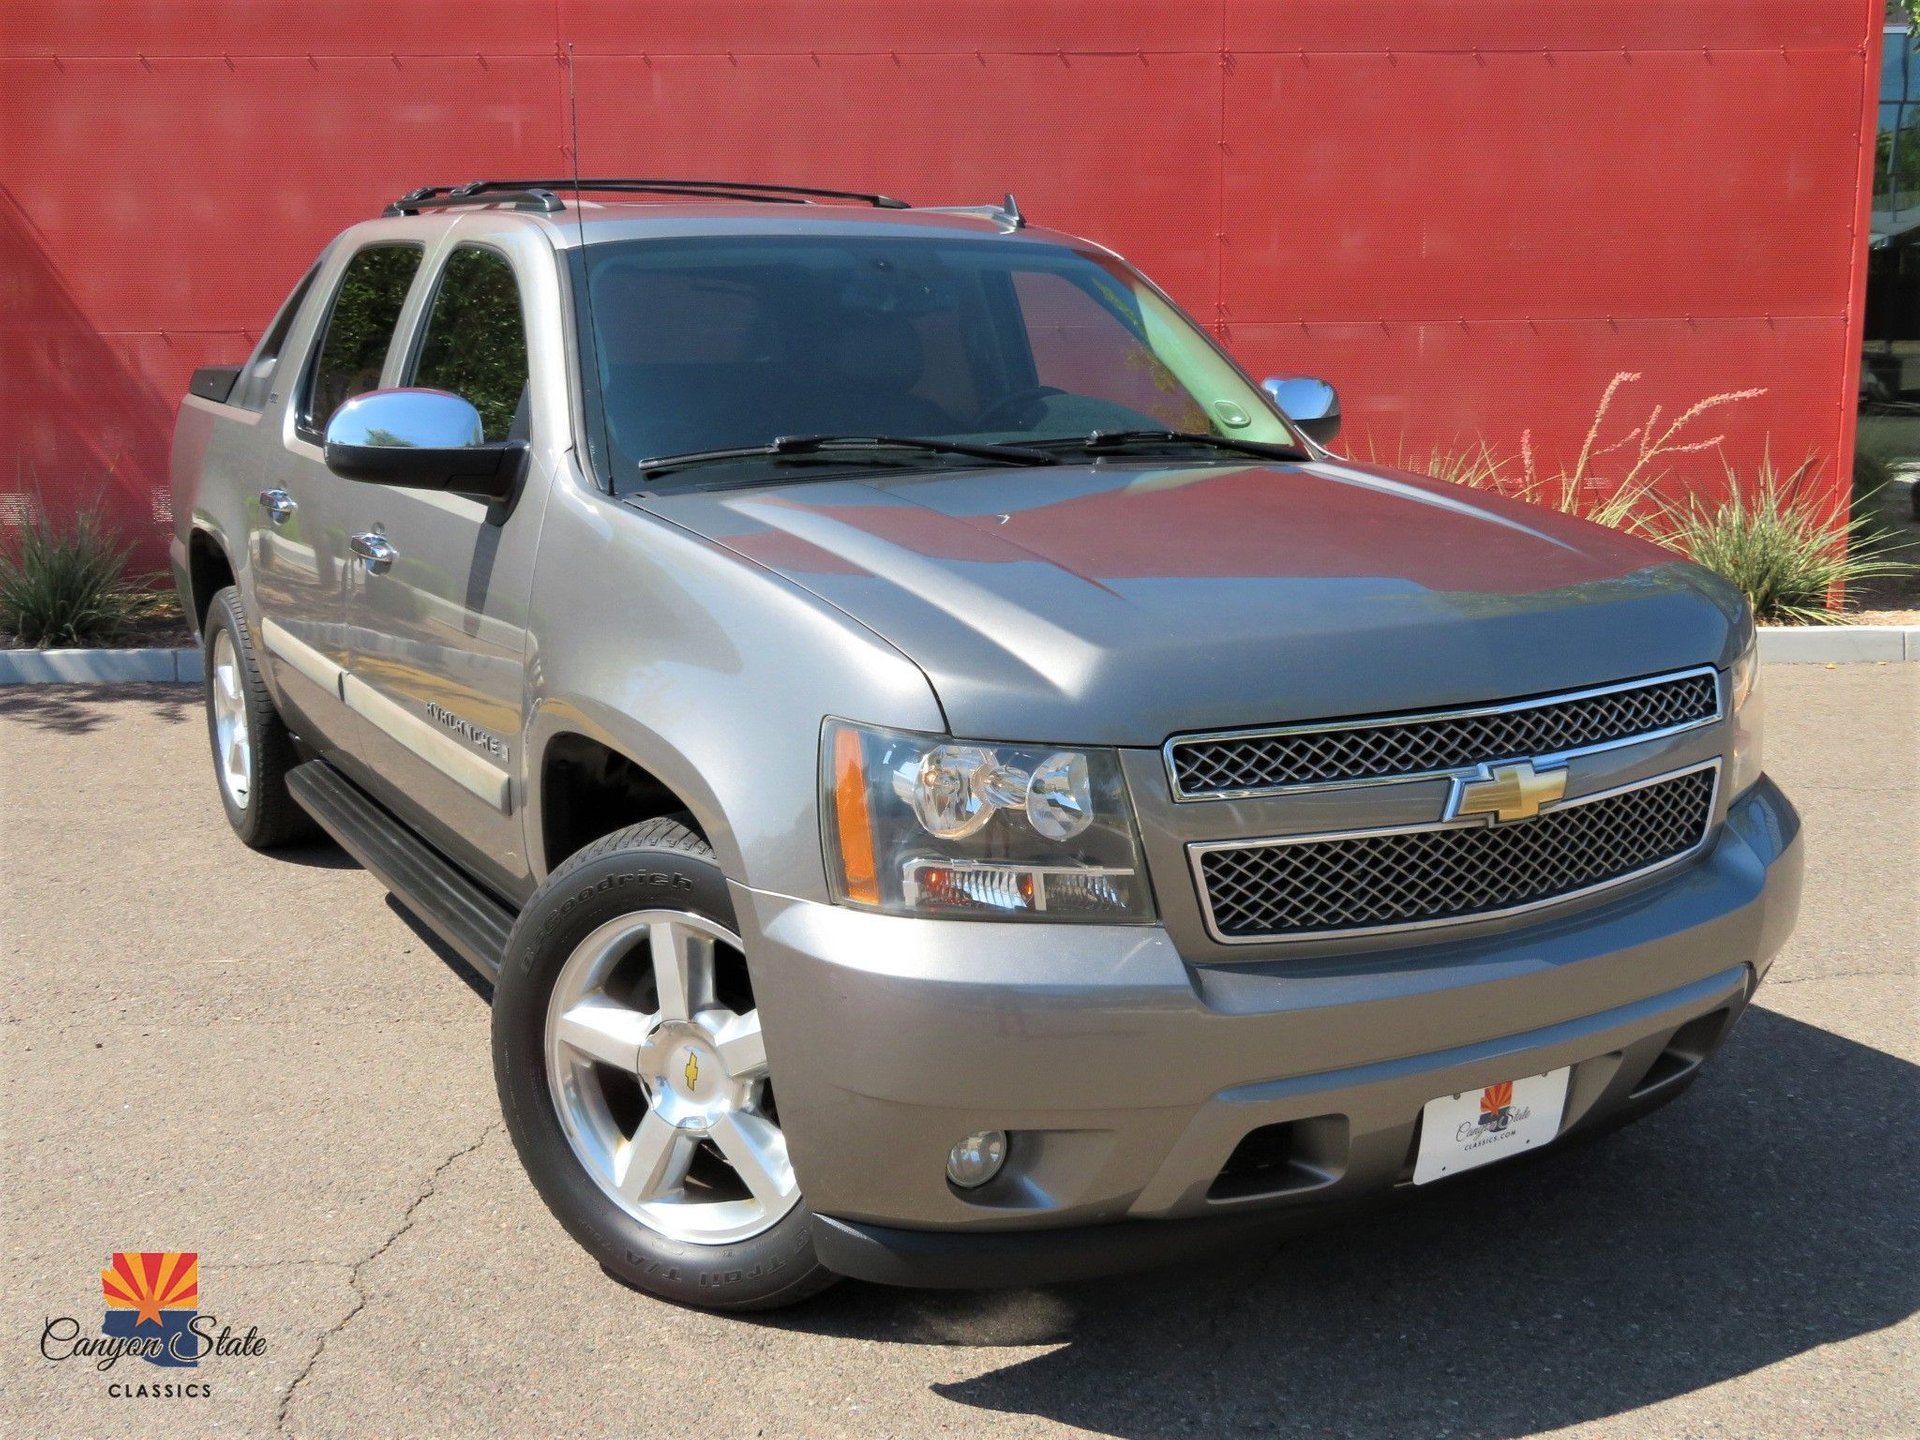 2008 Chevrolet Avalanche | Canyon State Classics